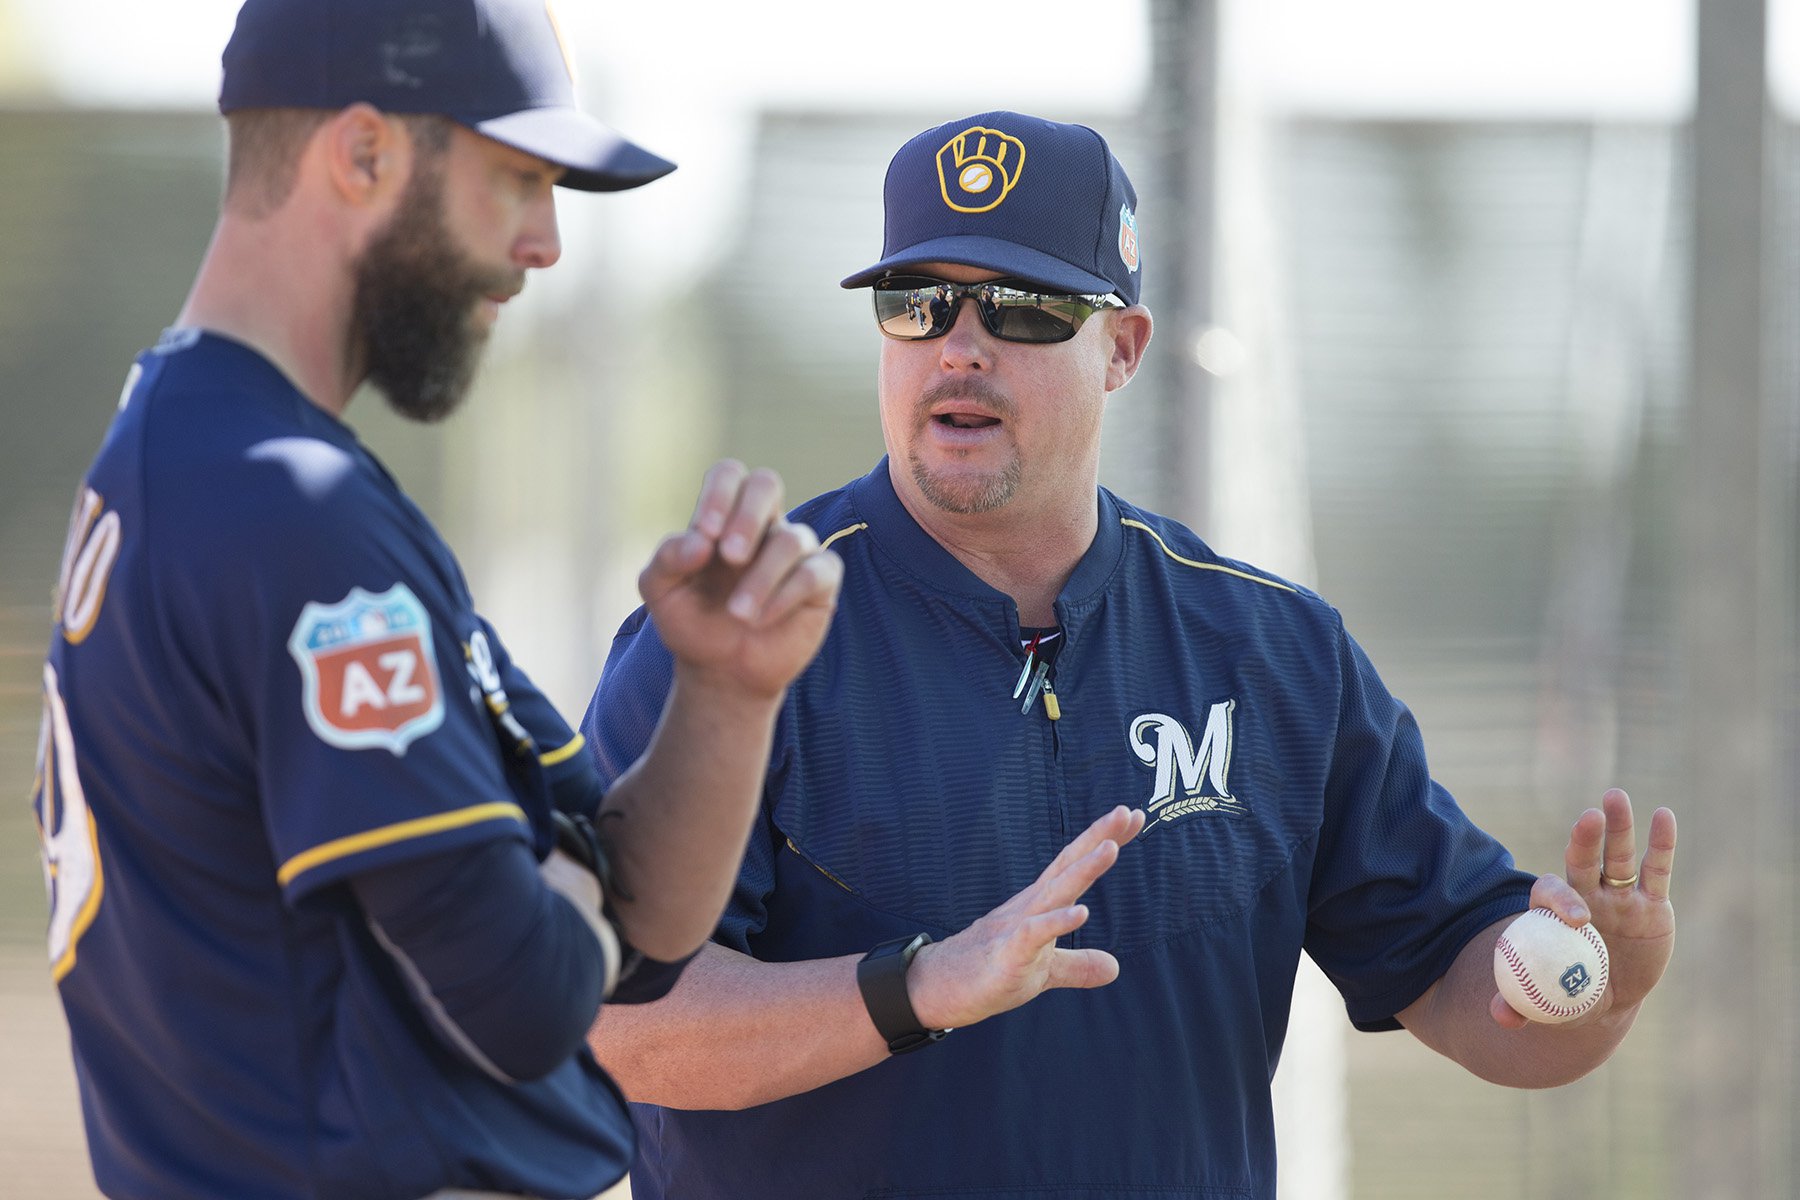 Cactus League Games Offer Clues to the Future - Shepherd Express